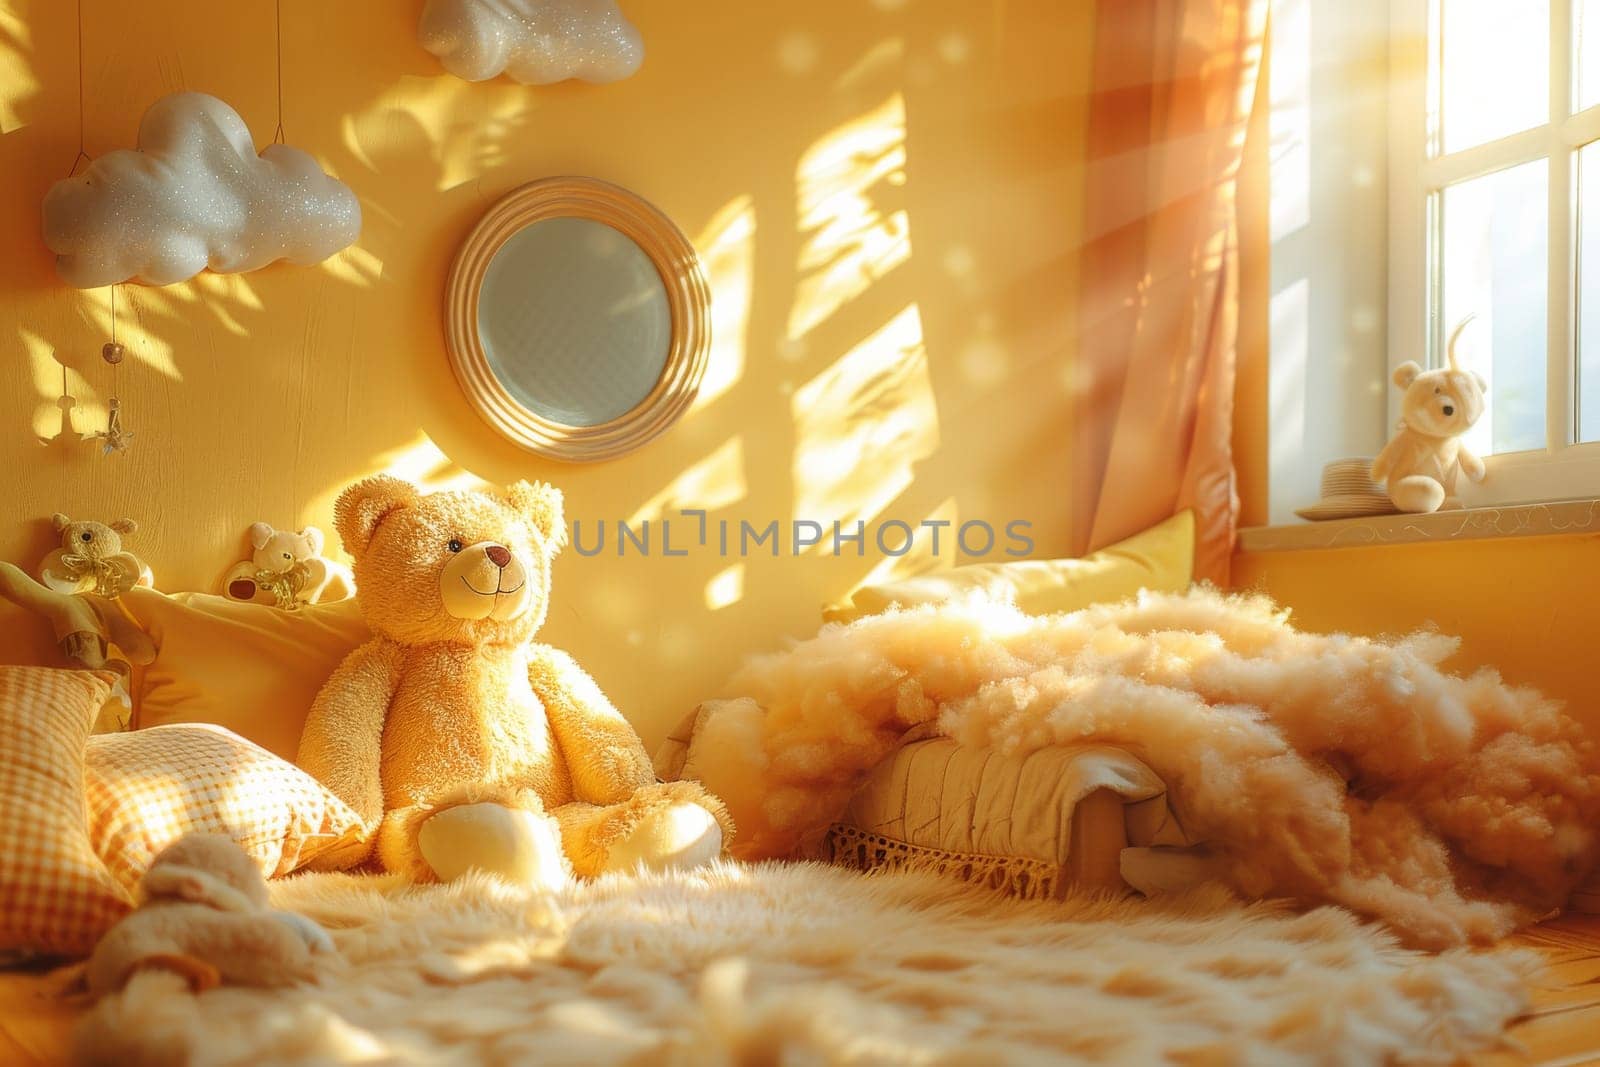 A teddy bear is sitting on a rug in a room with a yellow wall. The room is filled with other stuffed animals and has a cozy, warm atmosphere